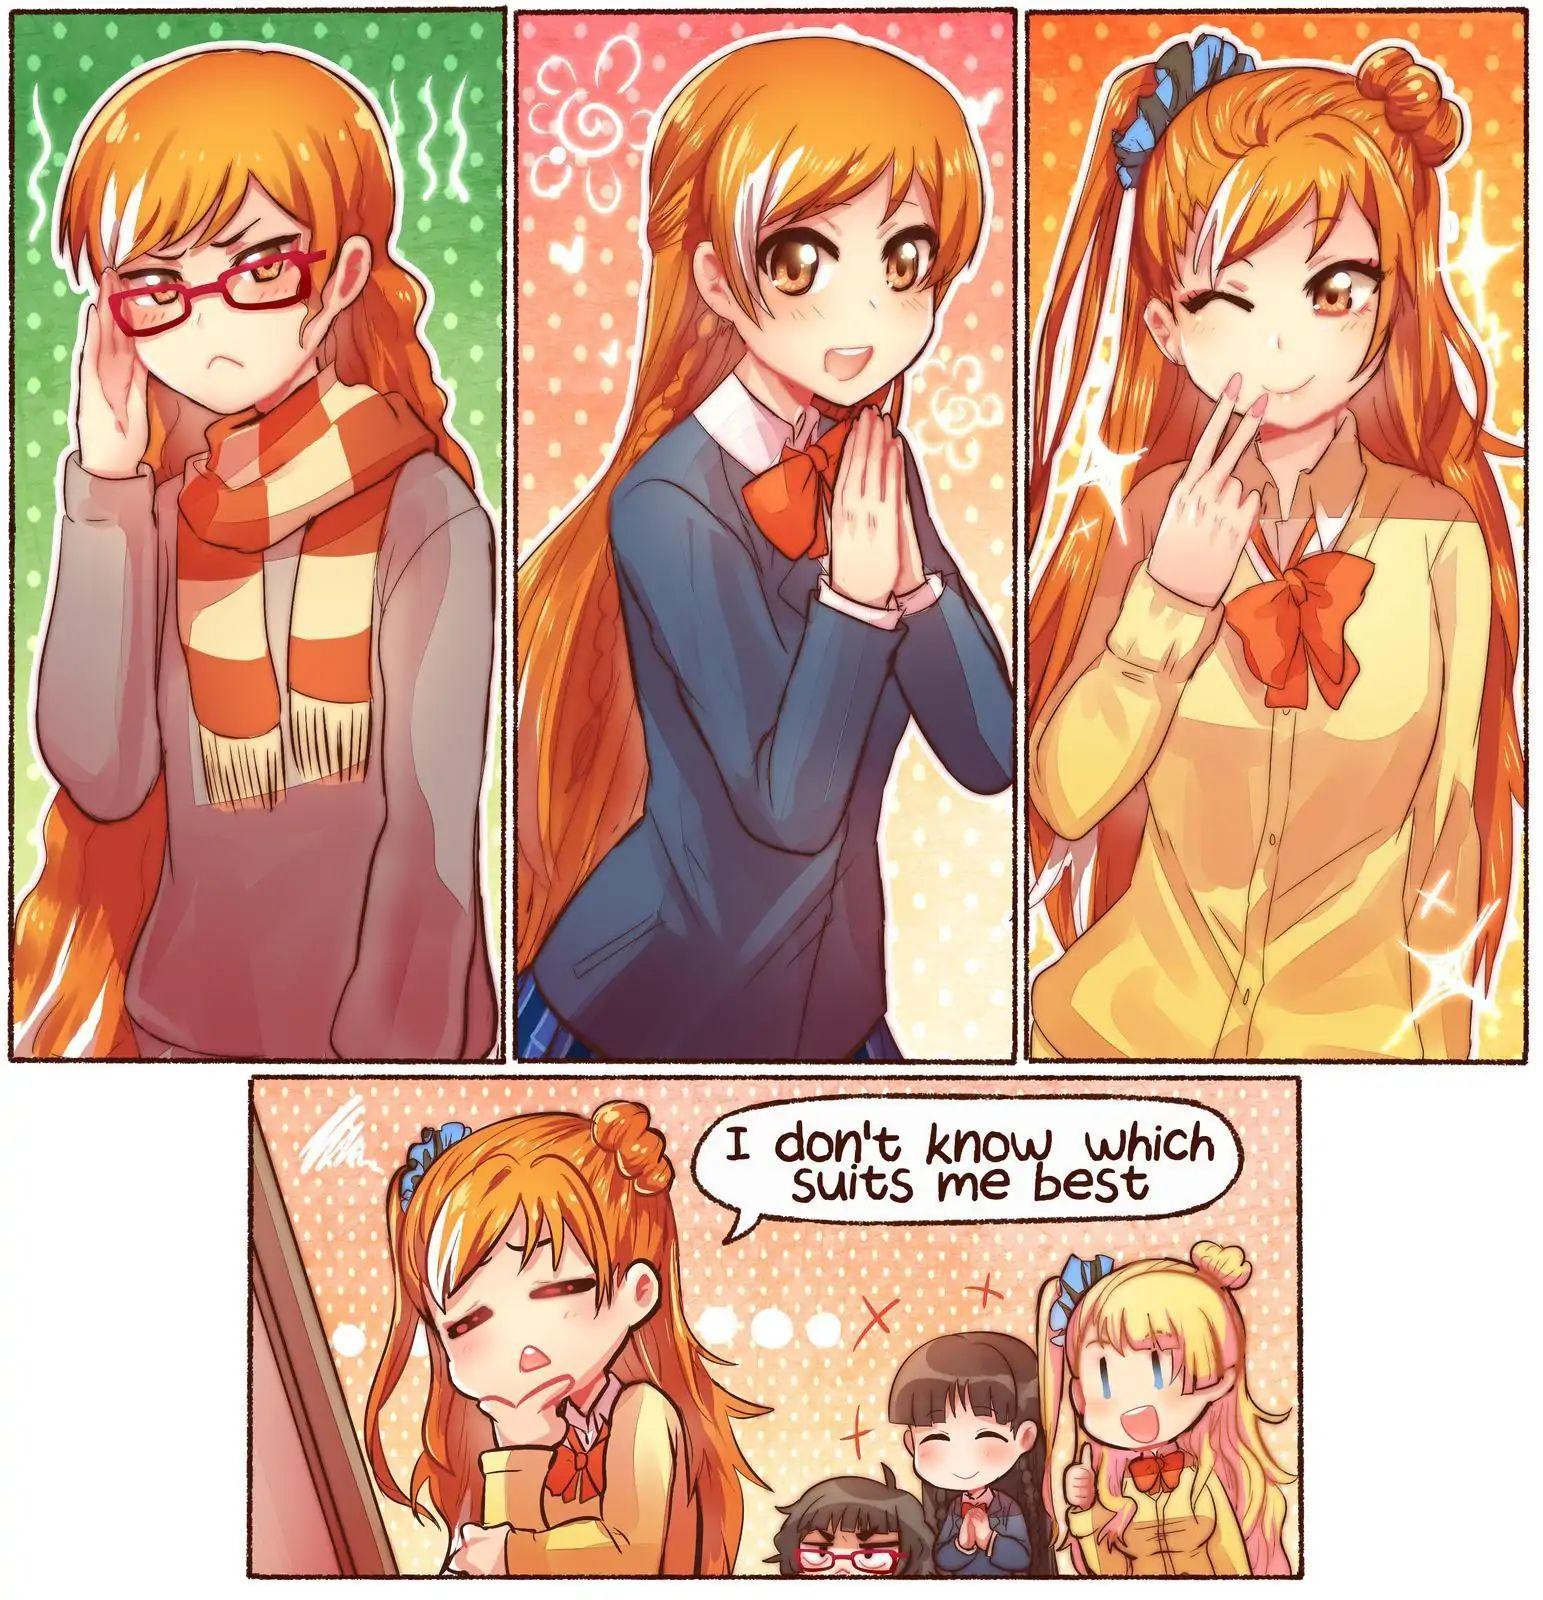 Read The Daily Life of Crunchyroll-Hime by Free On MangaKakalot